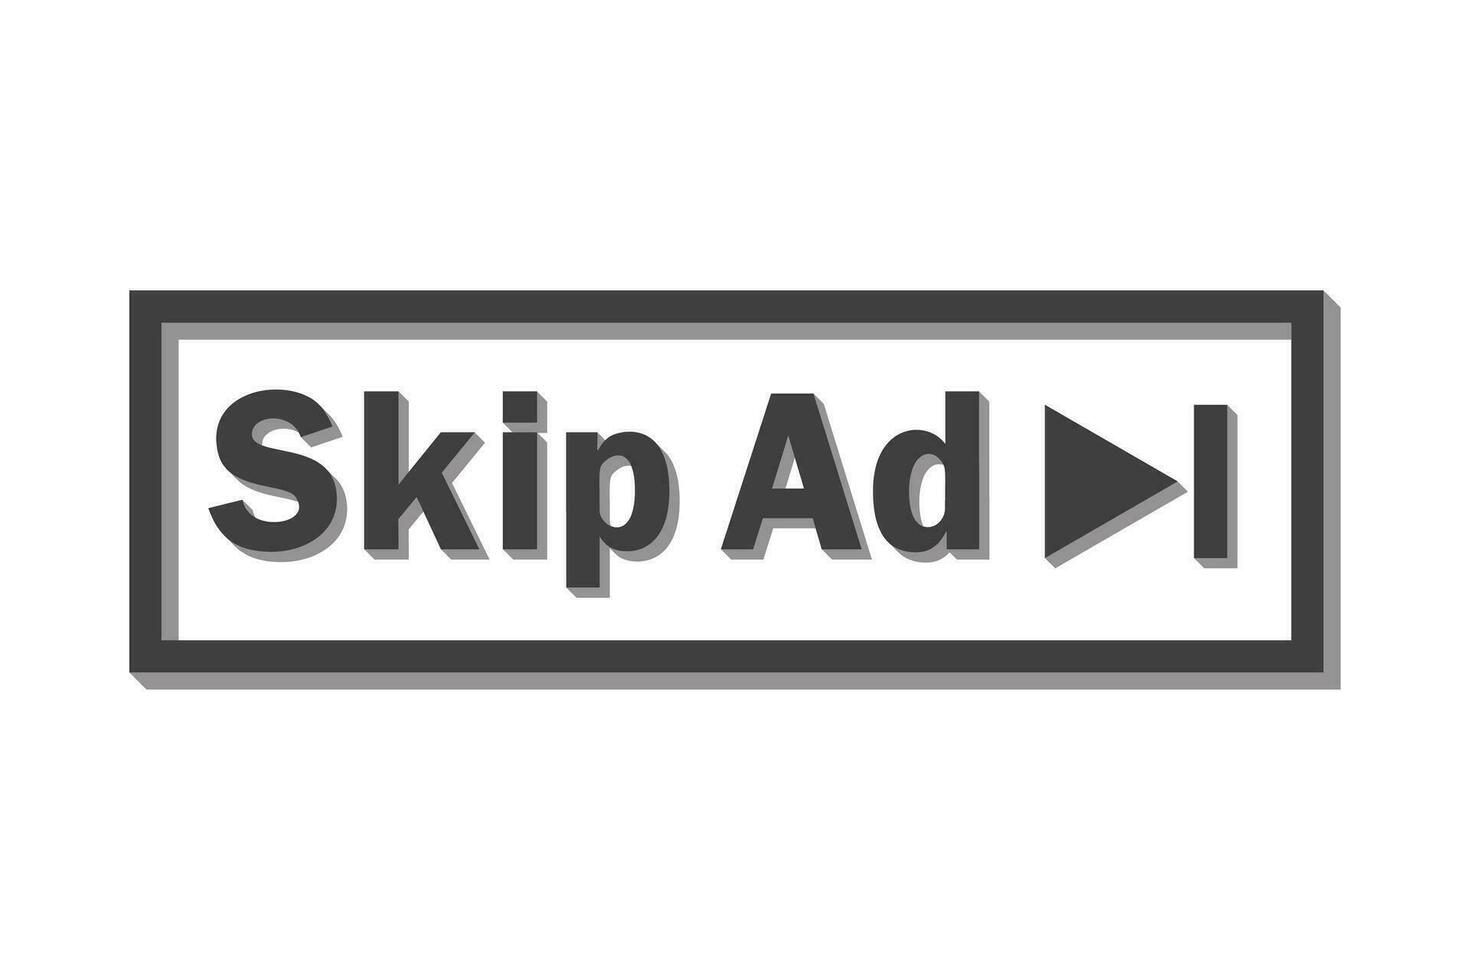 Skip Ad button. Video block icon for advertising. App template for interface. Vector